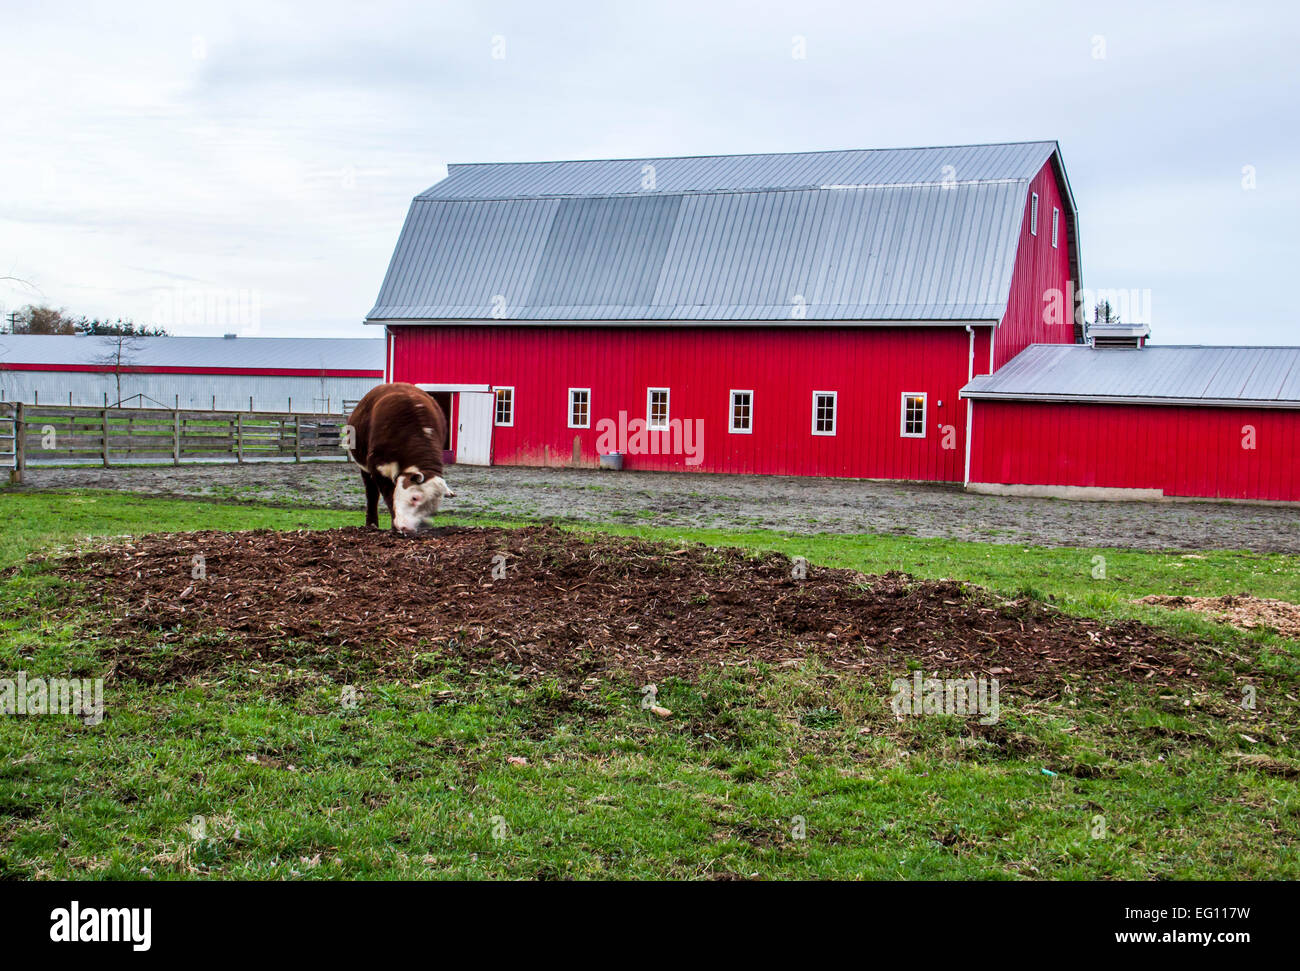 A hereford bull outside a red hip-roof barn on a farm in rural Canada Stock Photo